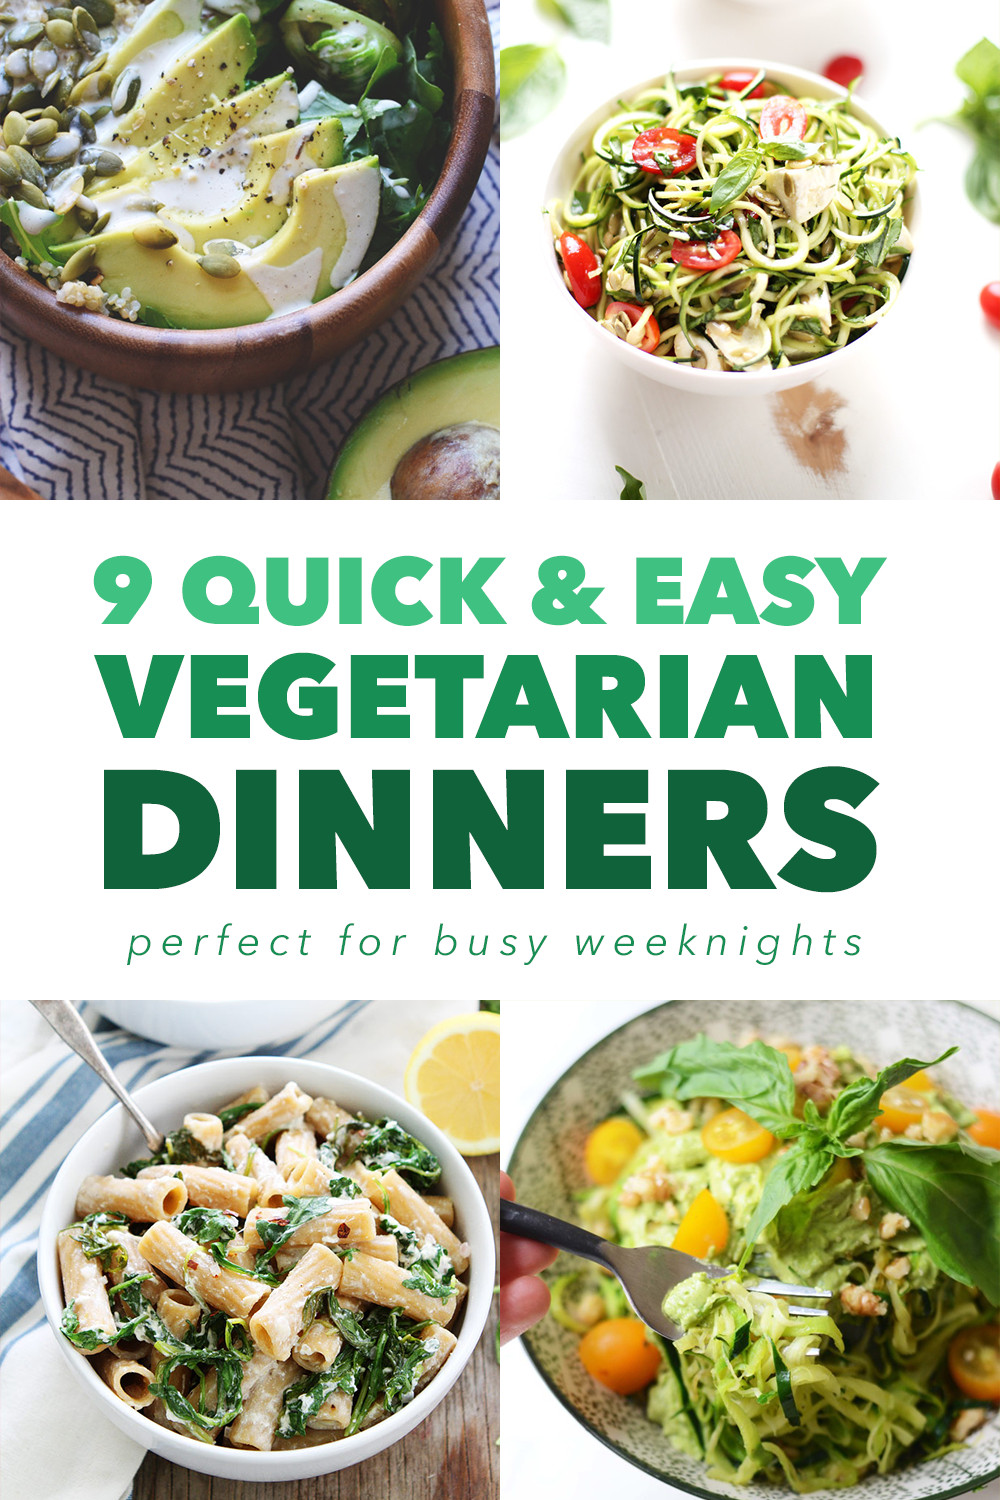 Quick Vegetarian Dinner Ideas
 9 Quick and Easy Ve arian Dinners for Busy Weeknights